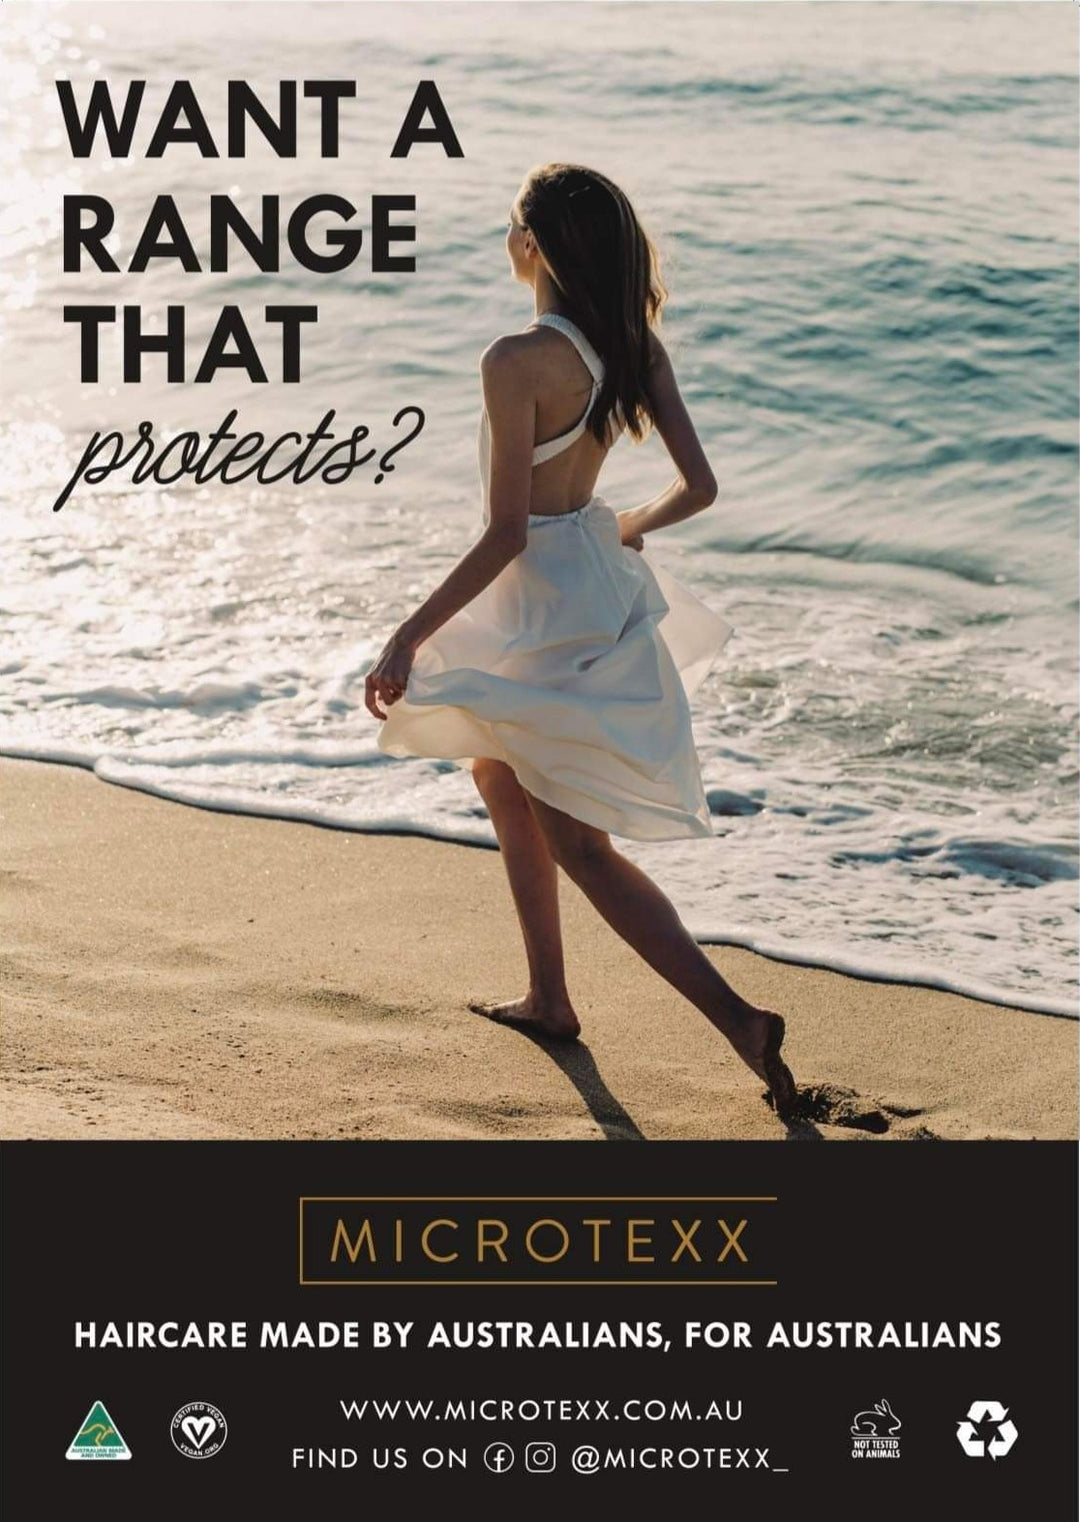 Microtexx Poster - Want a range that protects?